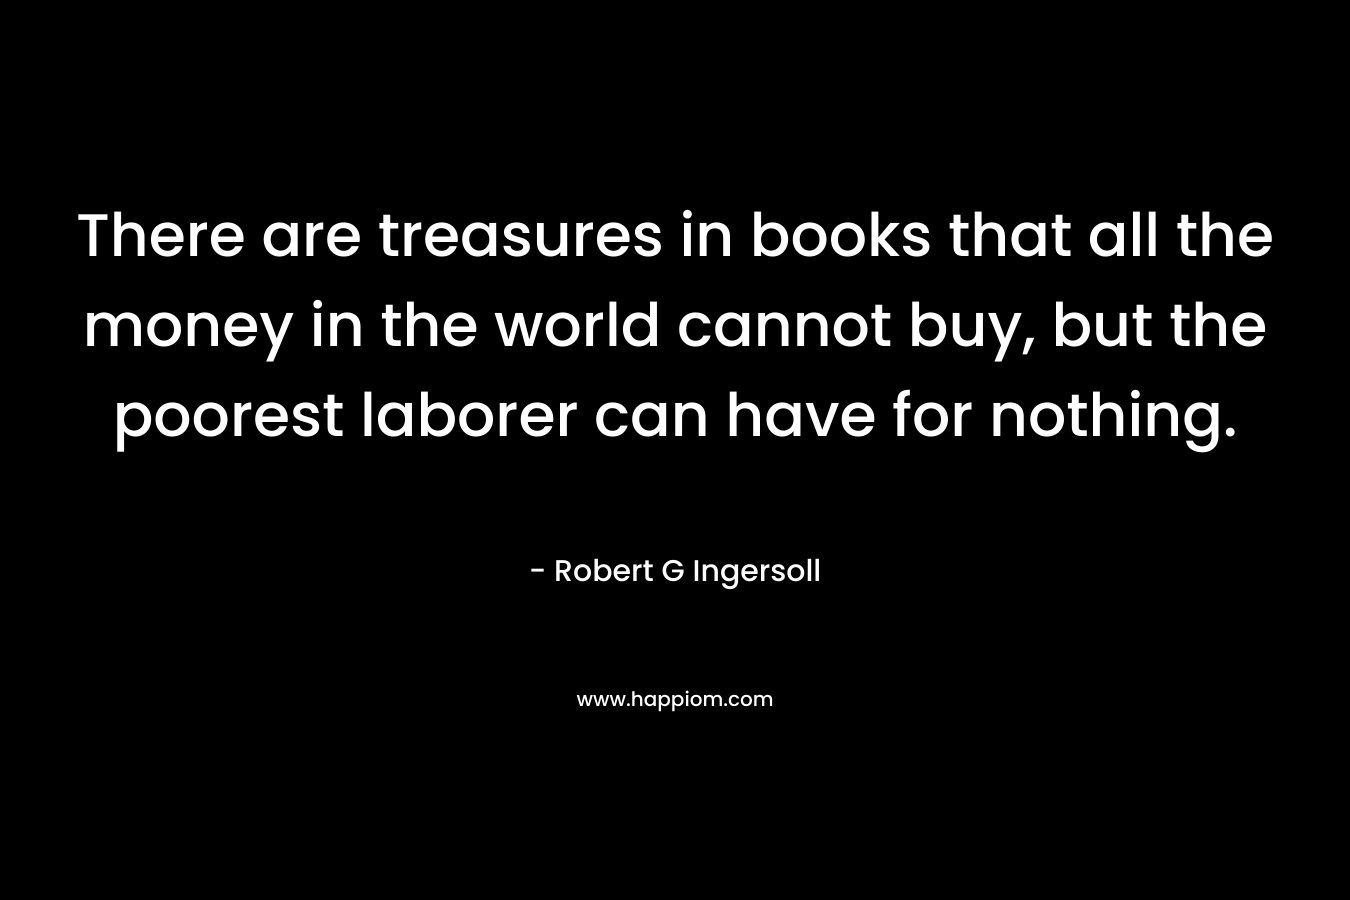 There are treasures in books that all the money in the world cannot buy, but the poorest laborer can have for nothing. – Robert G Ingersoll